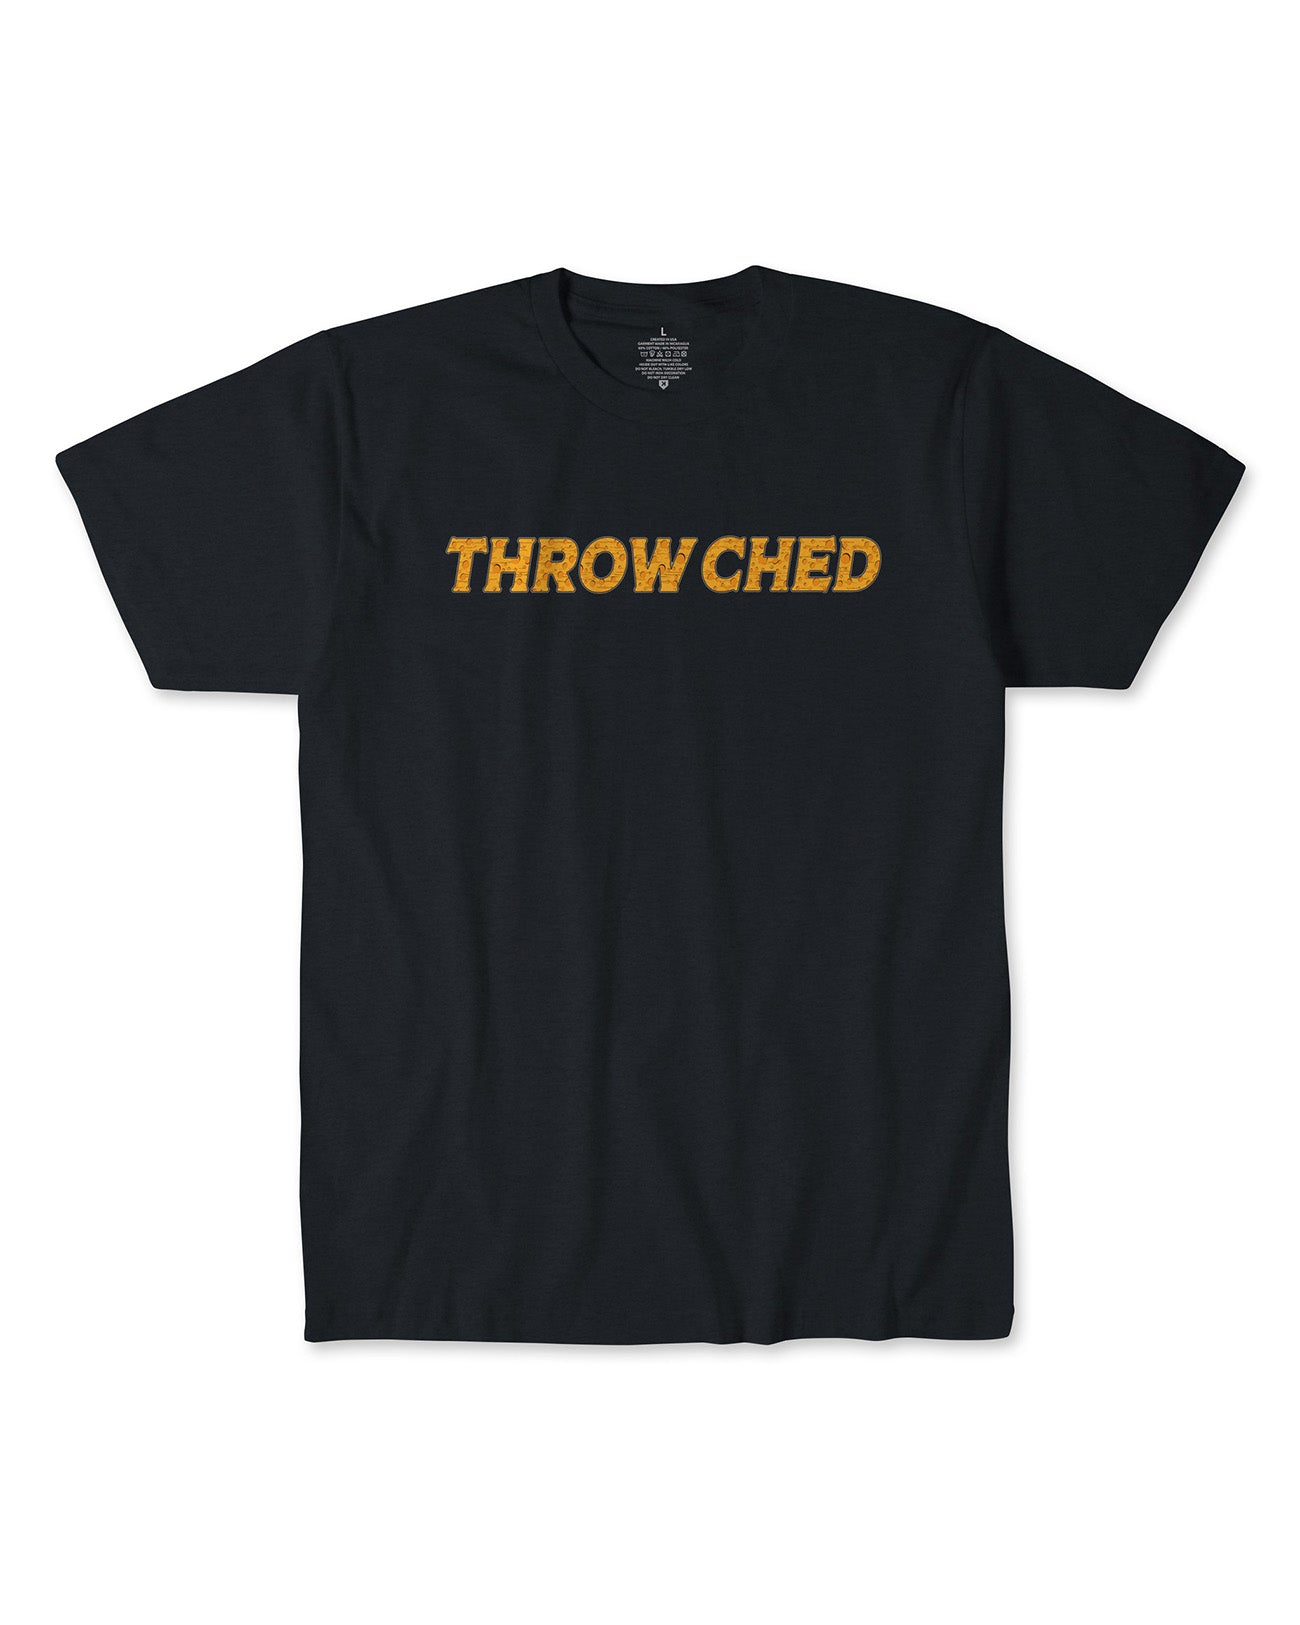 Throw Ched Tee